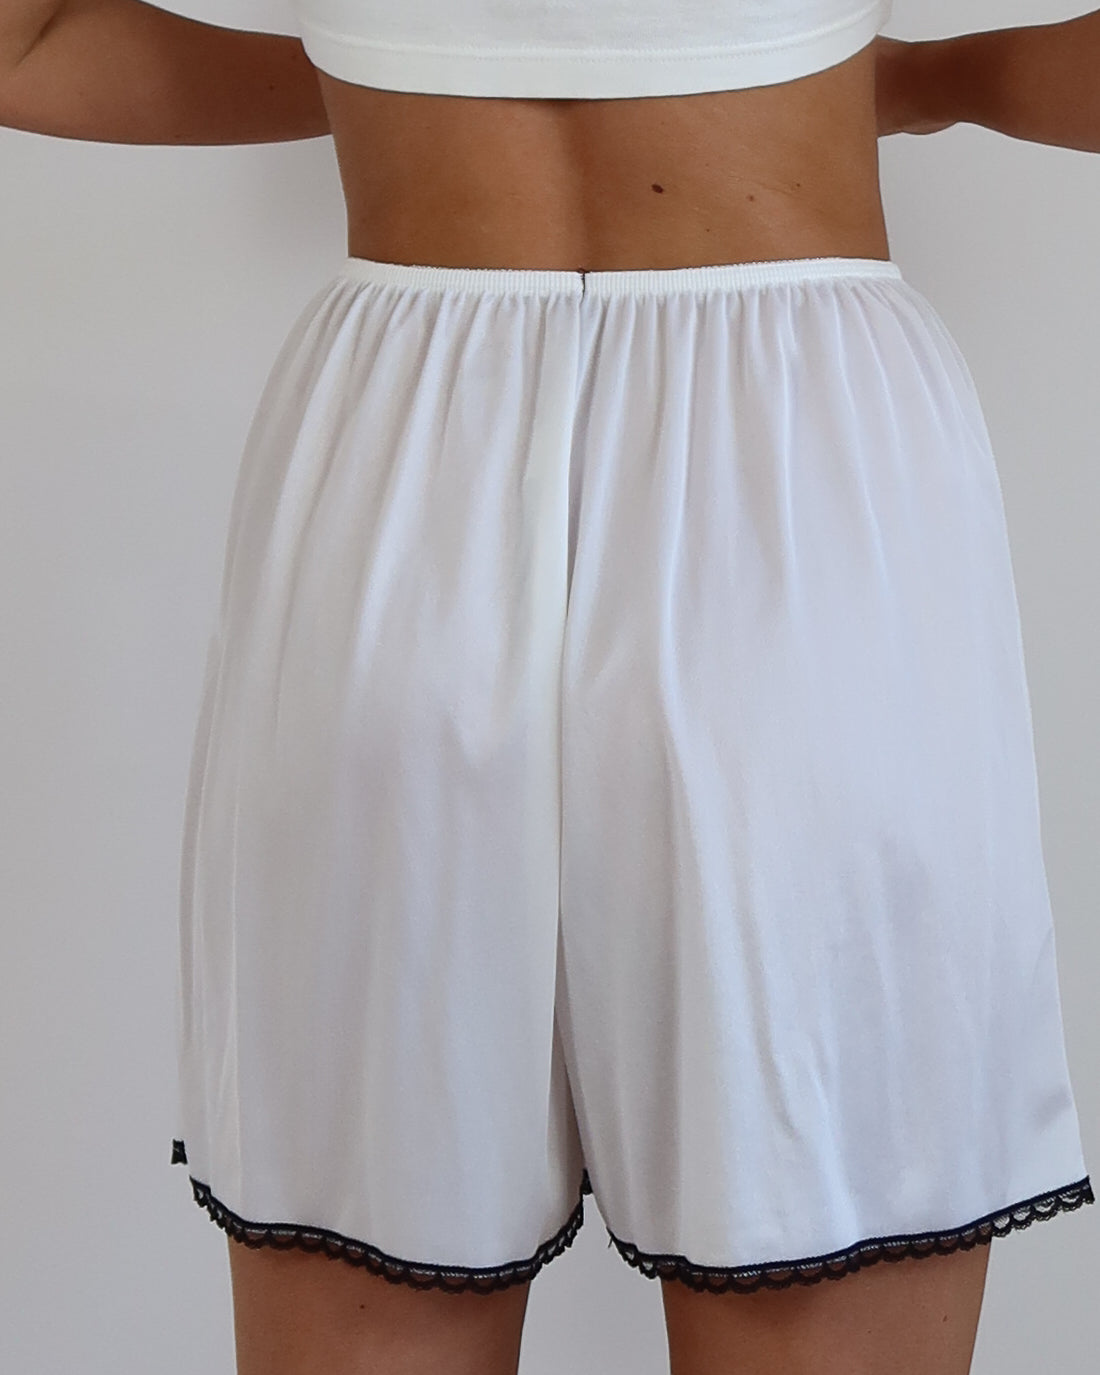 Vintage 80's Silky Shorts